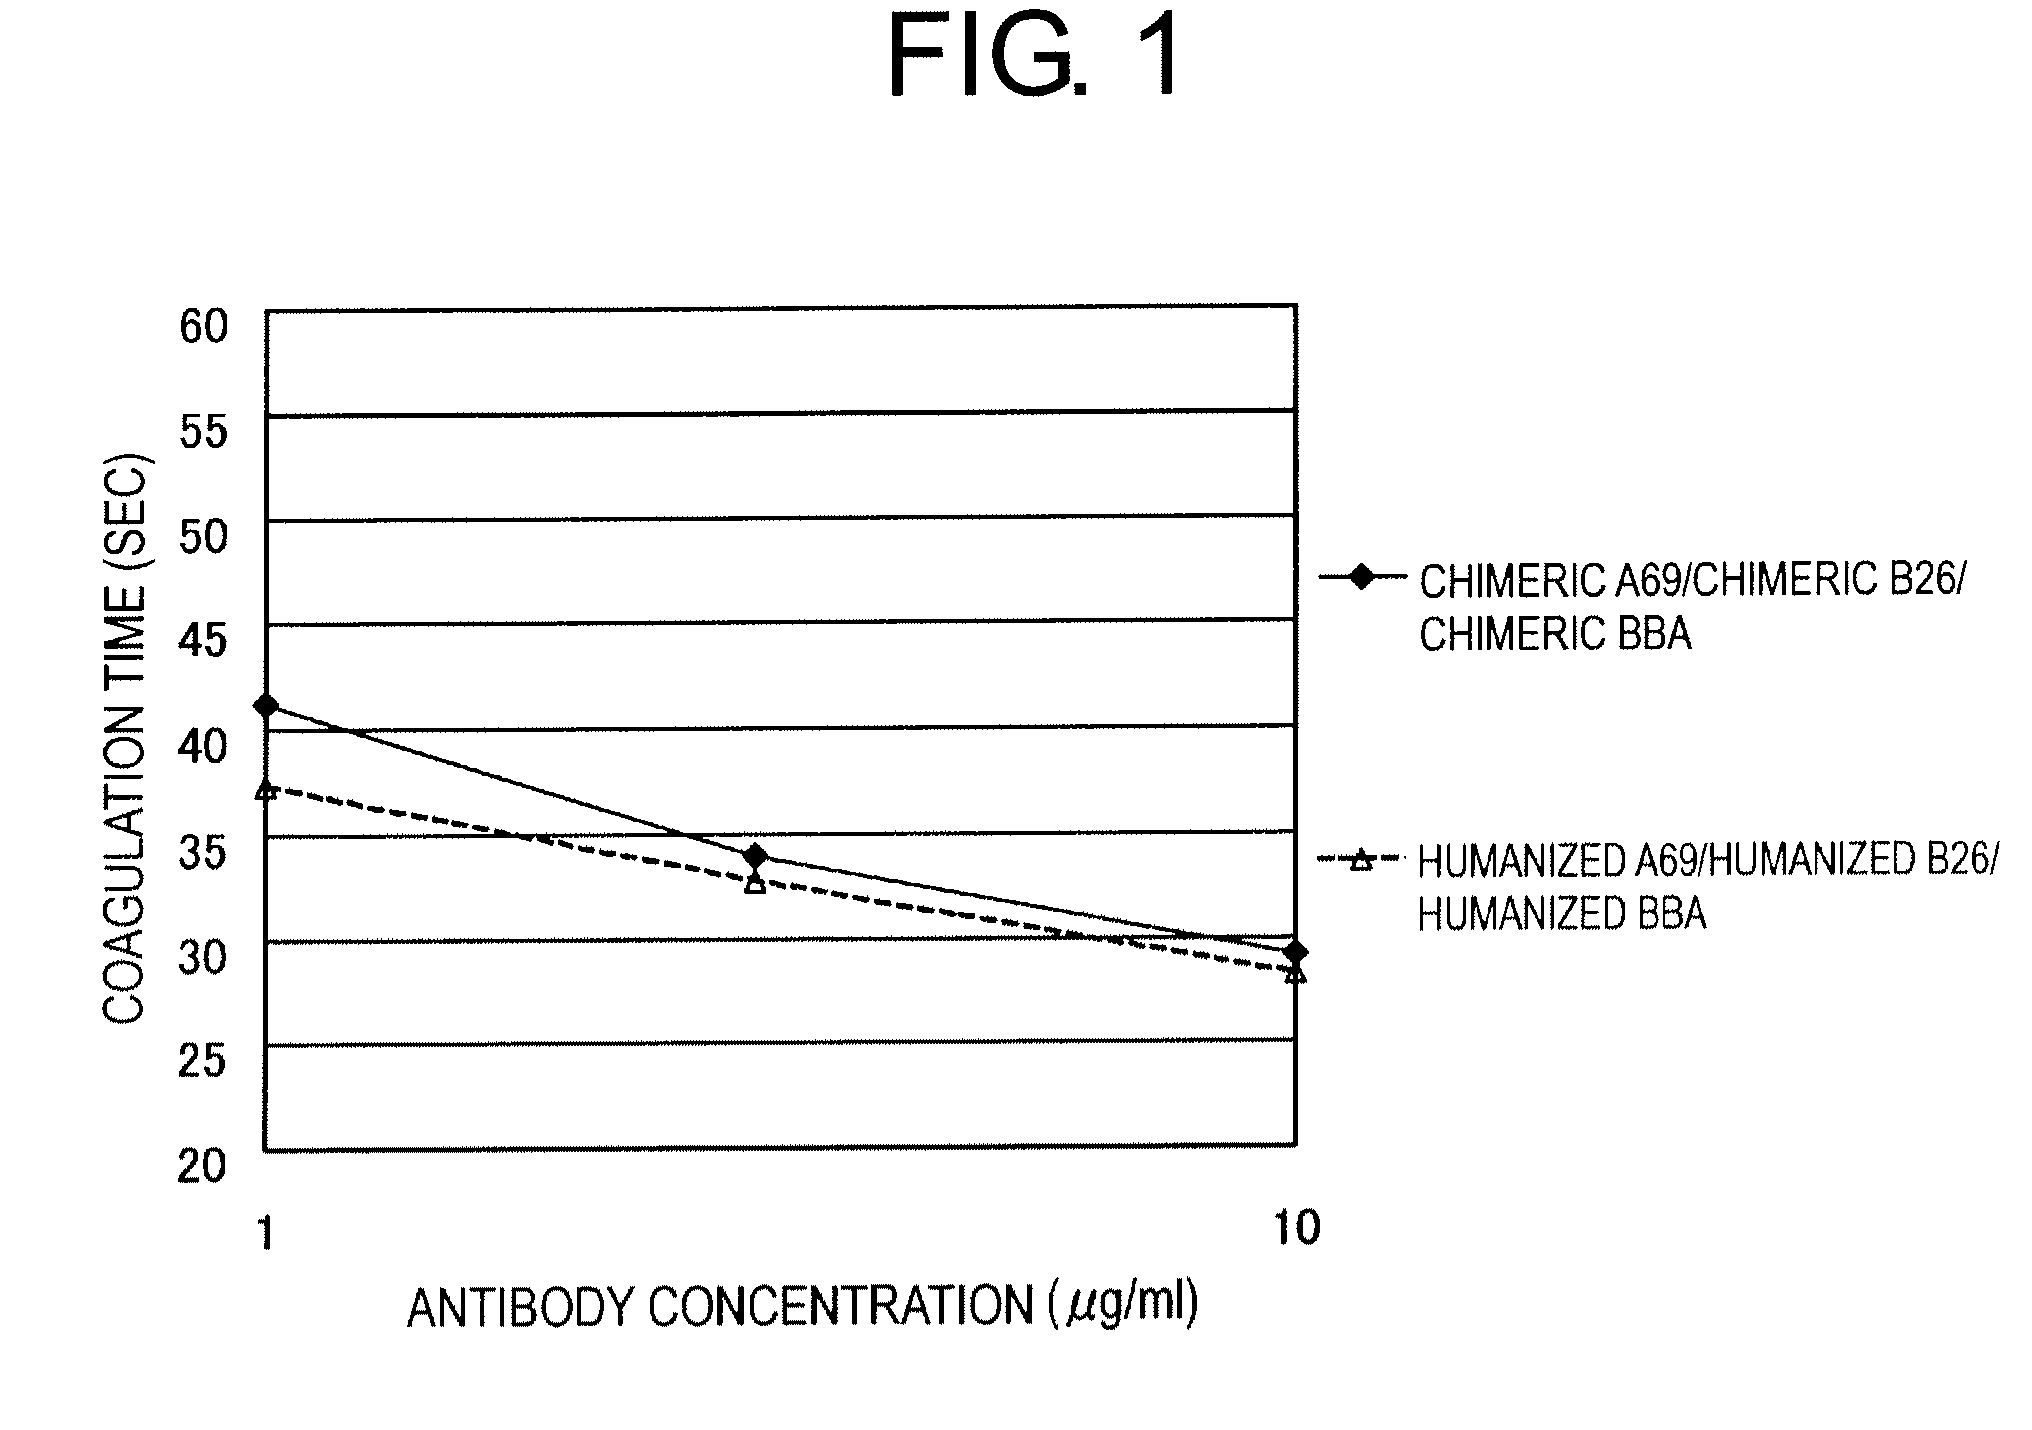 Methods for controlling blood pharmacokinetics of antibodies